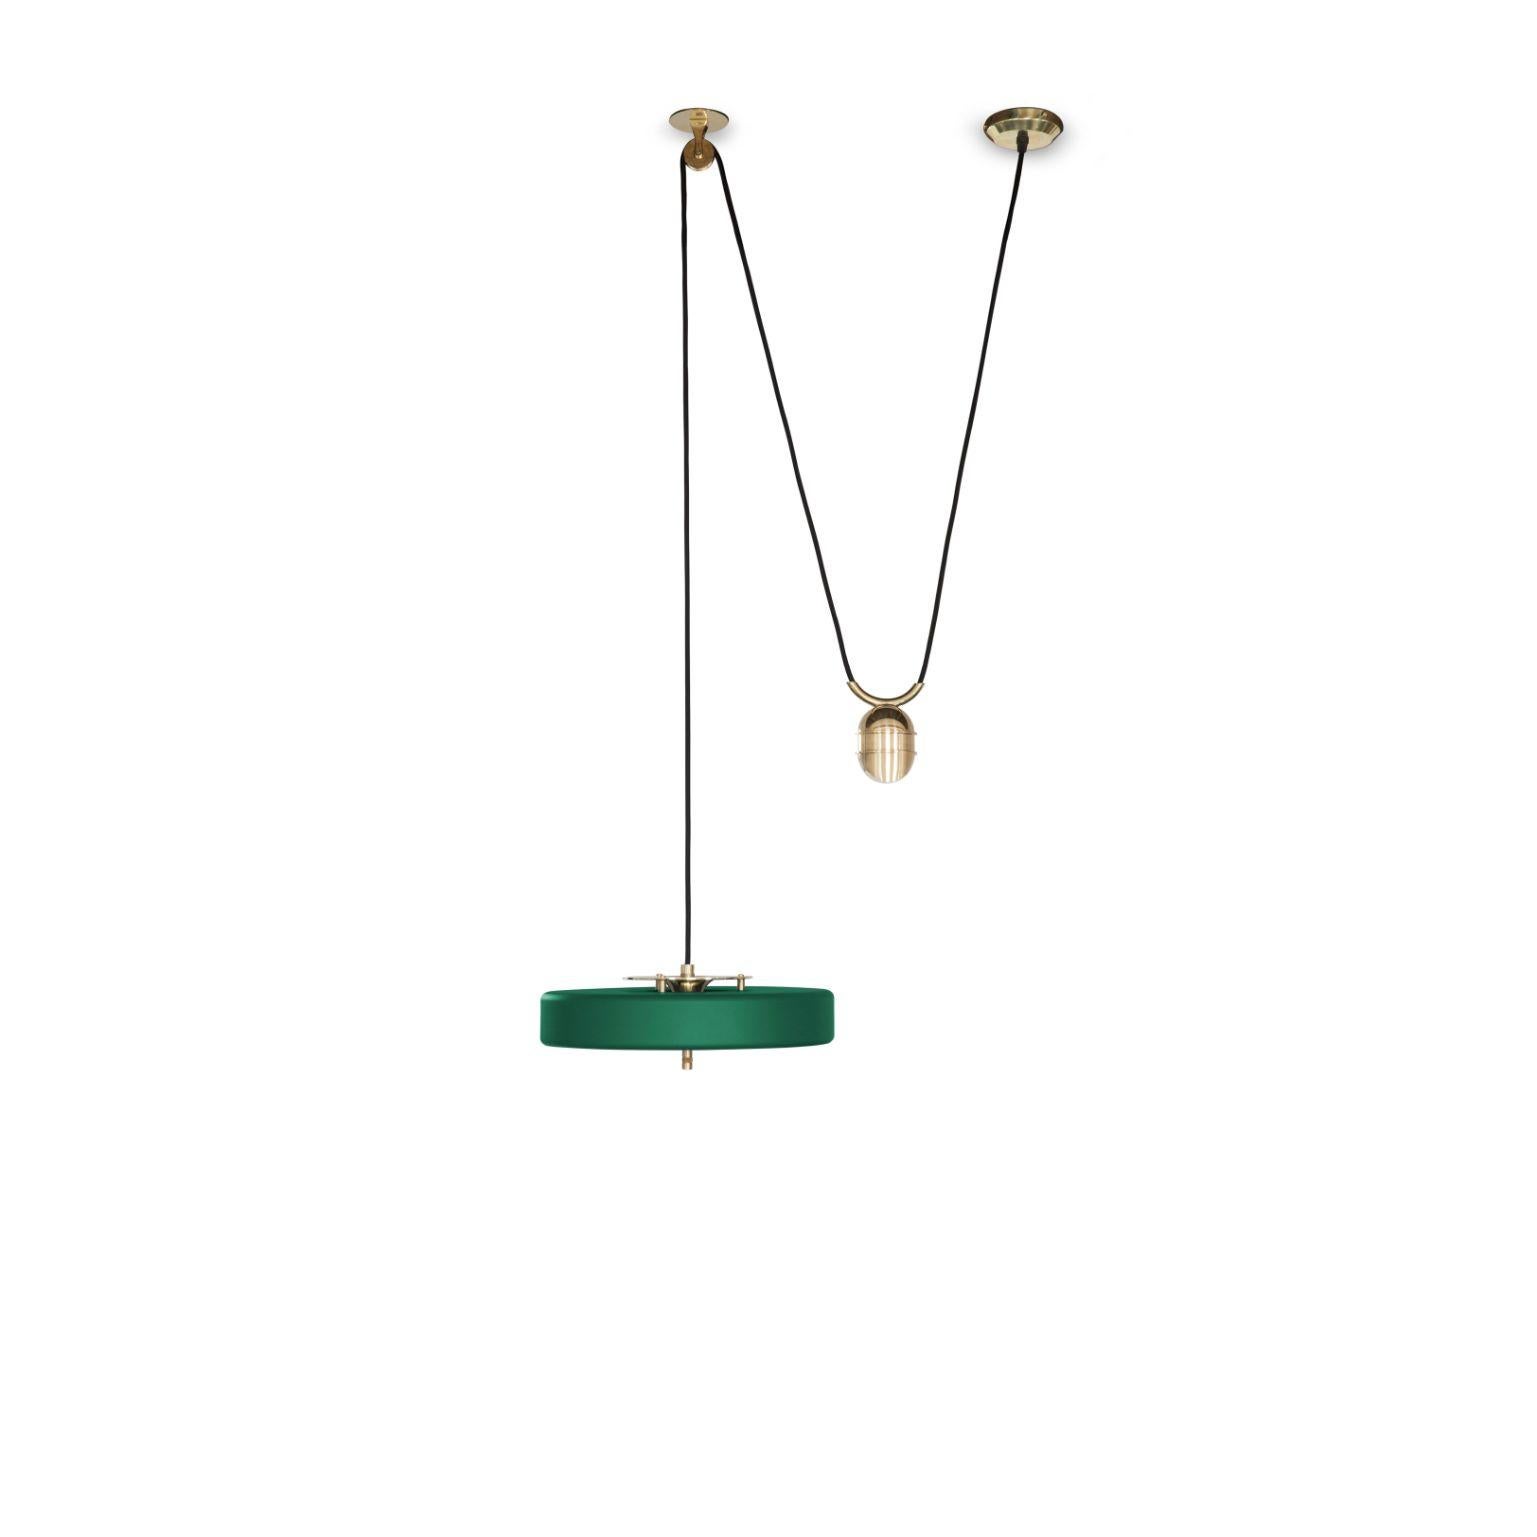 Revolve rise and fall pendant light - Brushed brass - Green by Bert Frank
Dimensions: 30 x 35 x 11 cm, small lamp 7.6 cm
Materials: Brass, steel

 
When Adam Yeats and Robbie Llewellyn founded Bert Frank in 2013 it was a meeting of minds and the